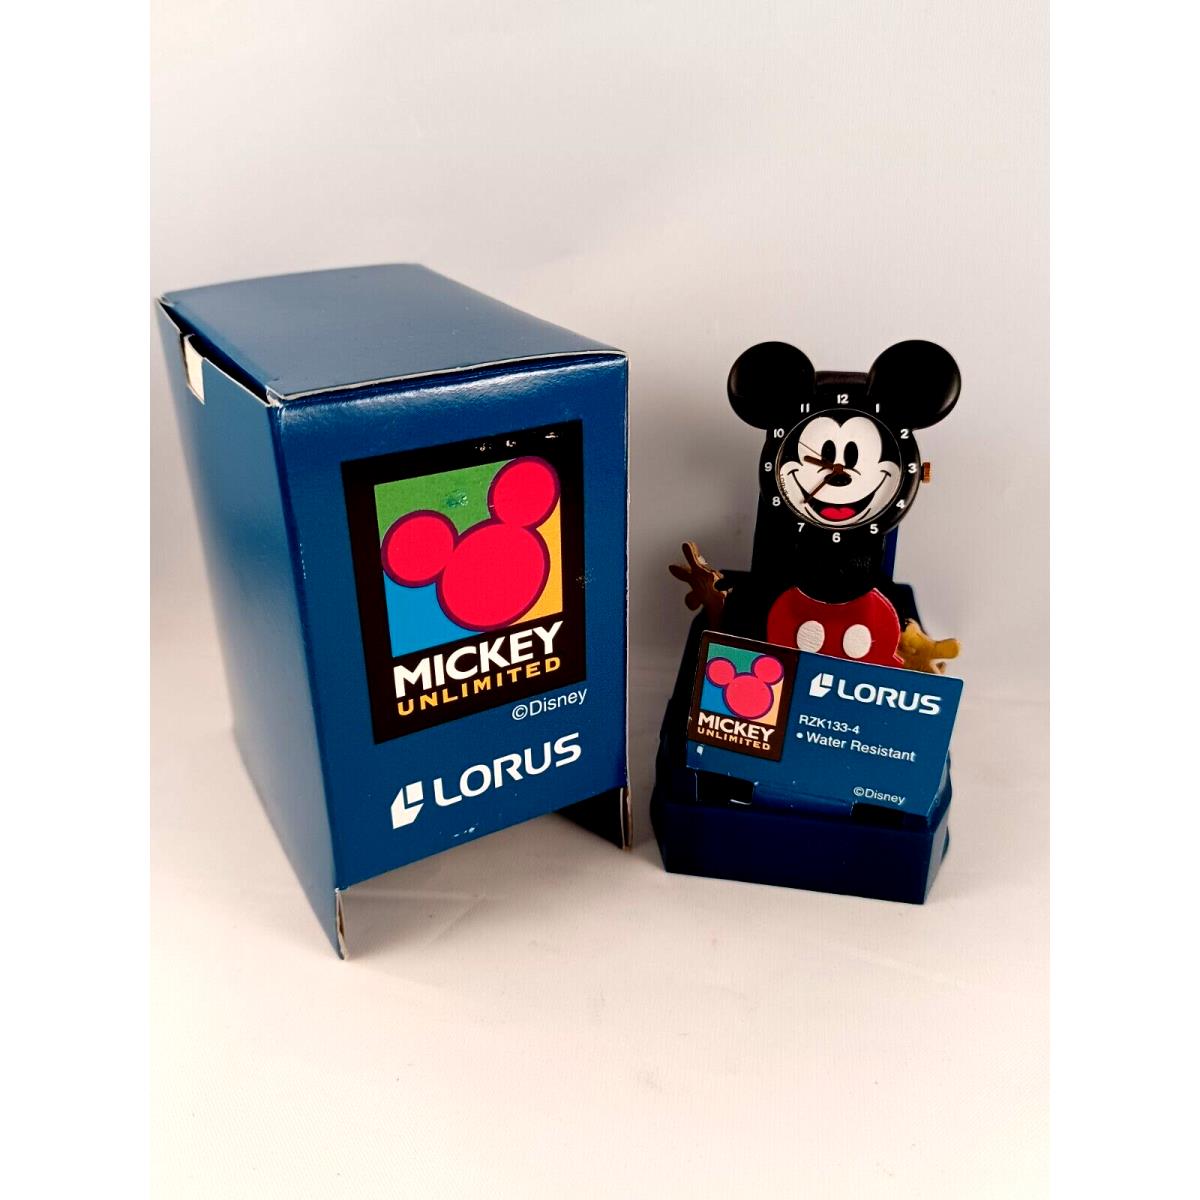 Disney Mickey Mouse Lorus Watch Mib Rzk 133-4 Full Leather Body Vtg Unlimited